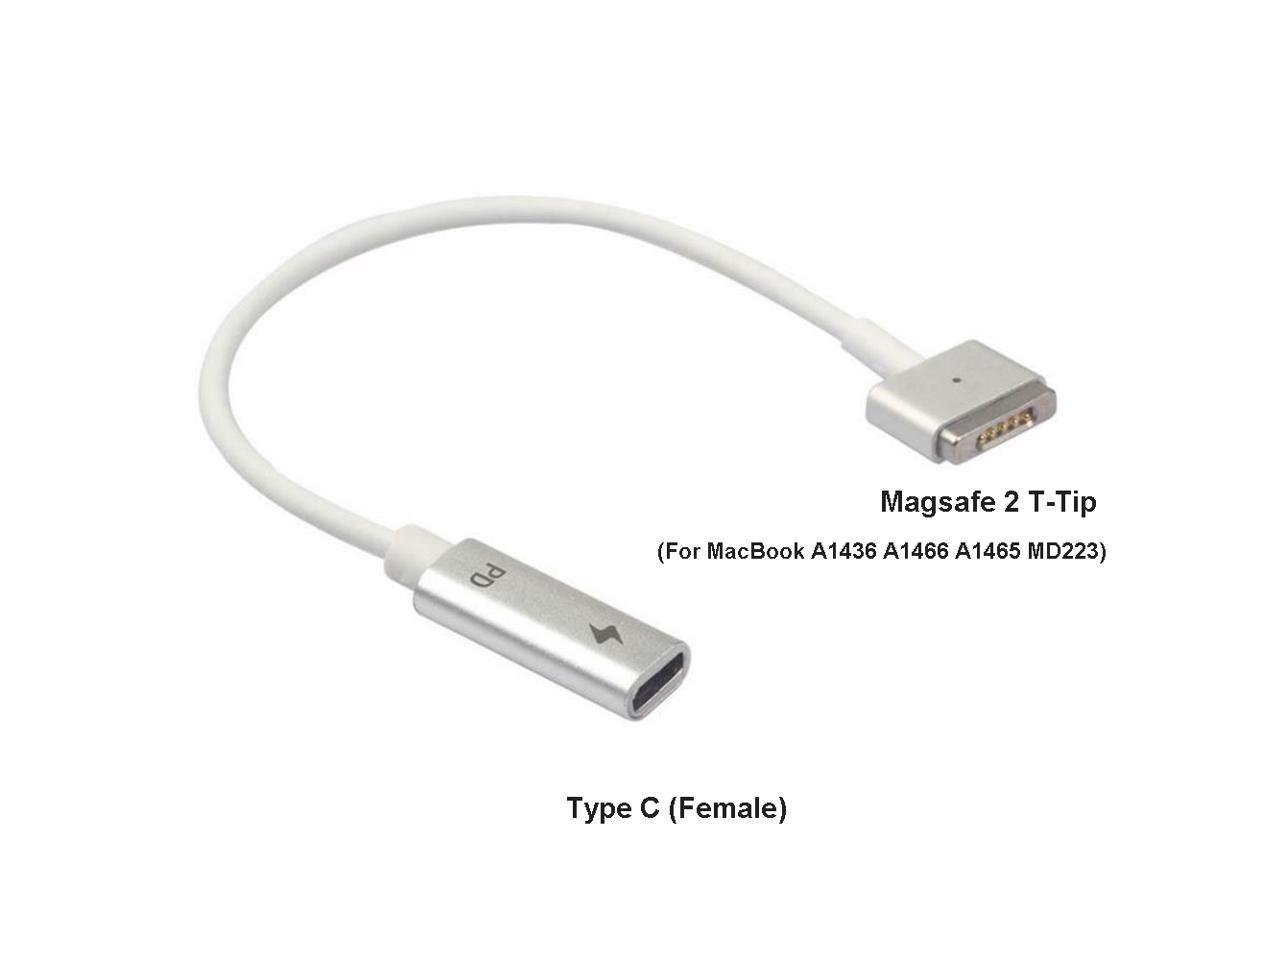 charging cable for macbook air 13 inch